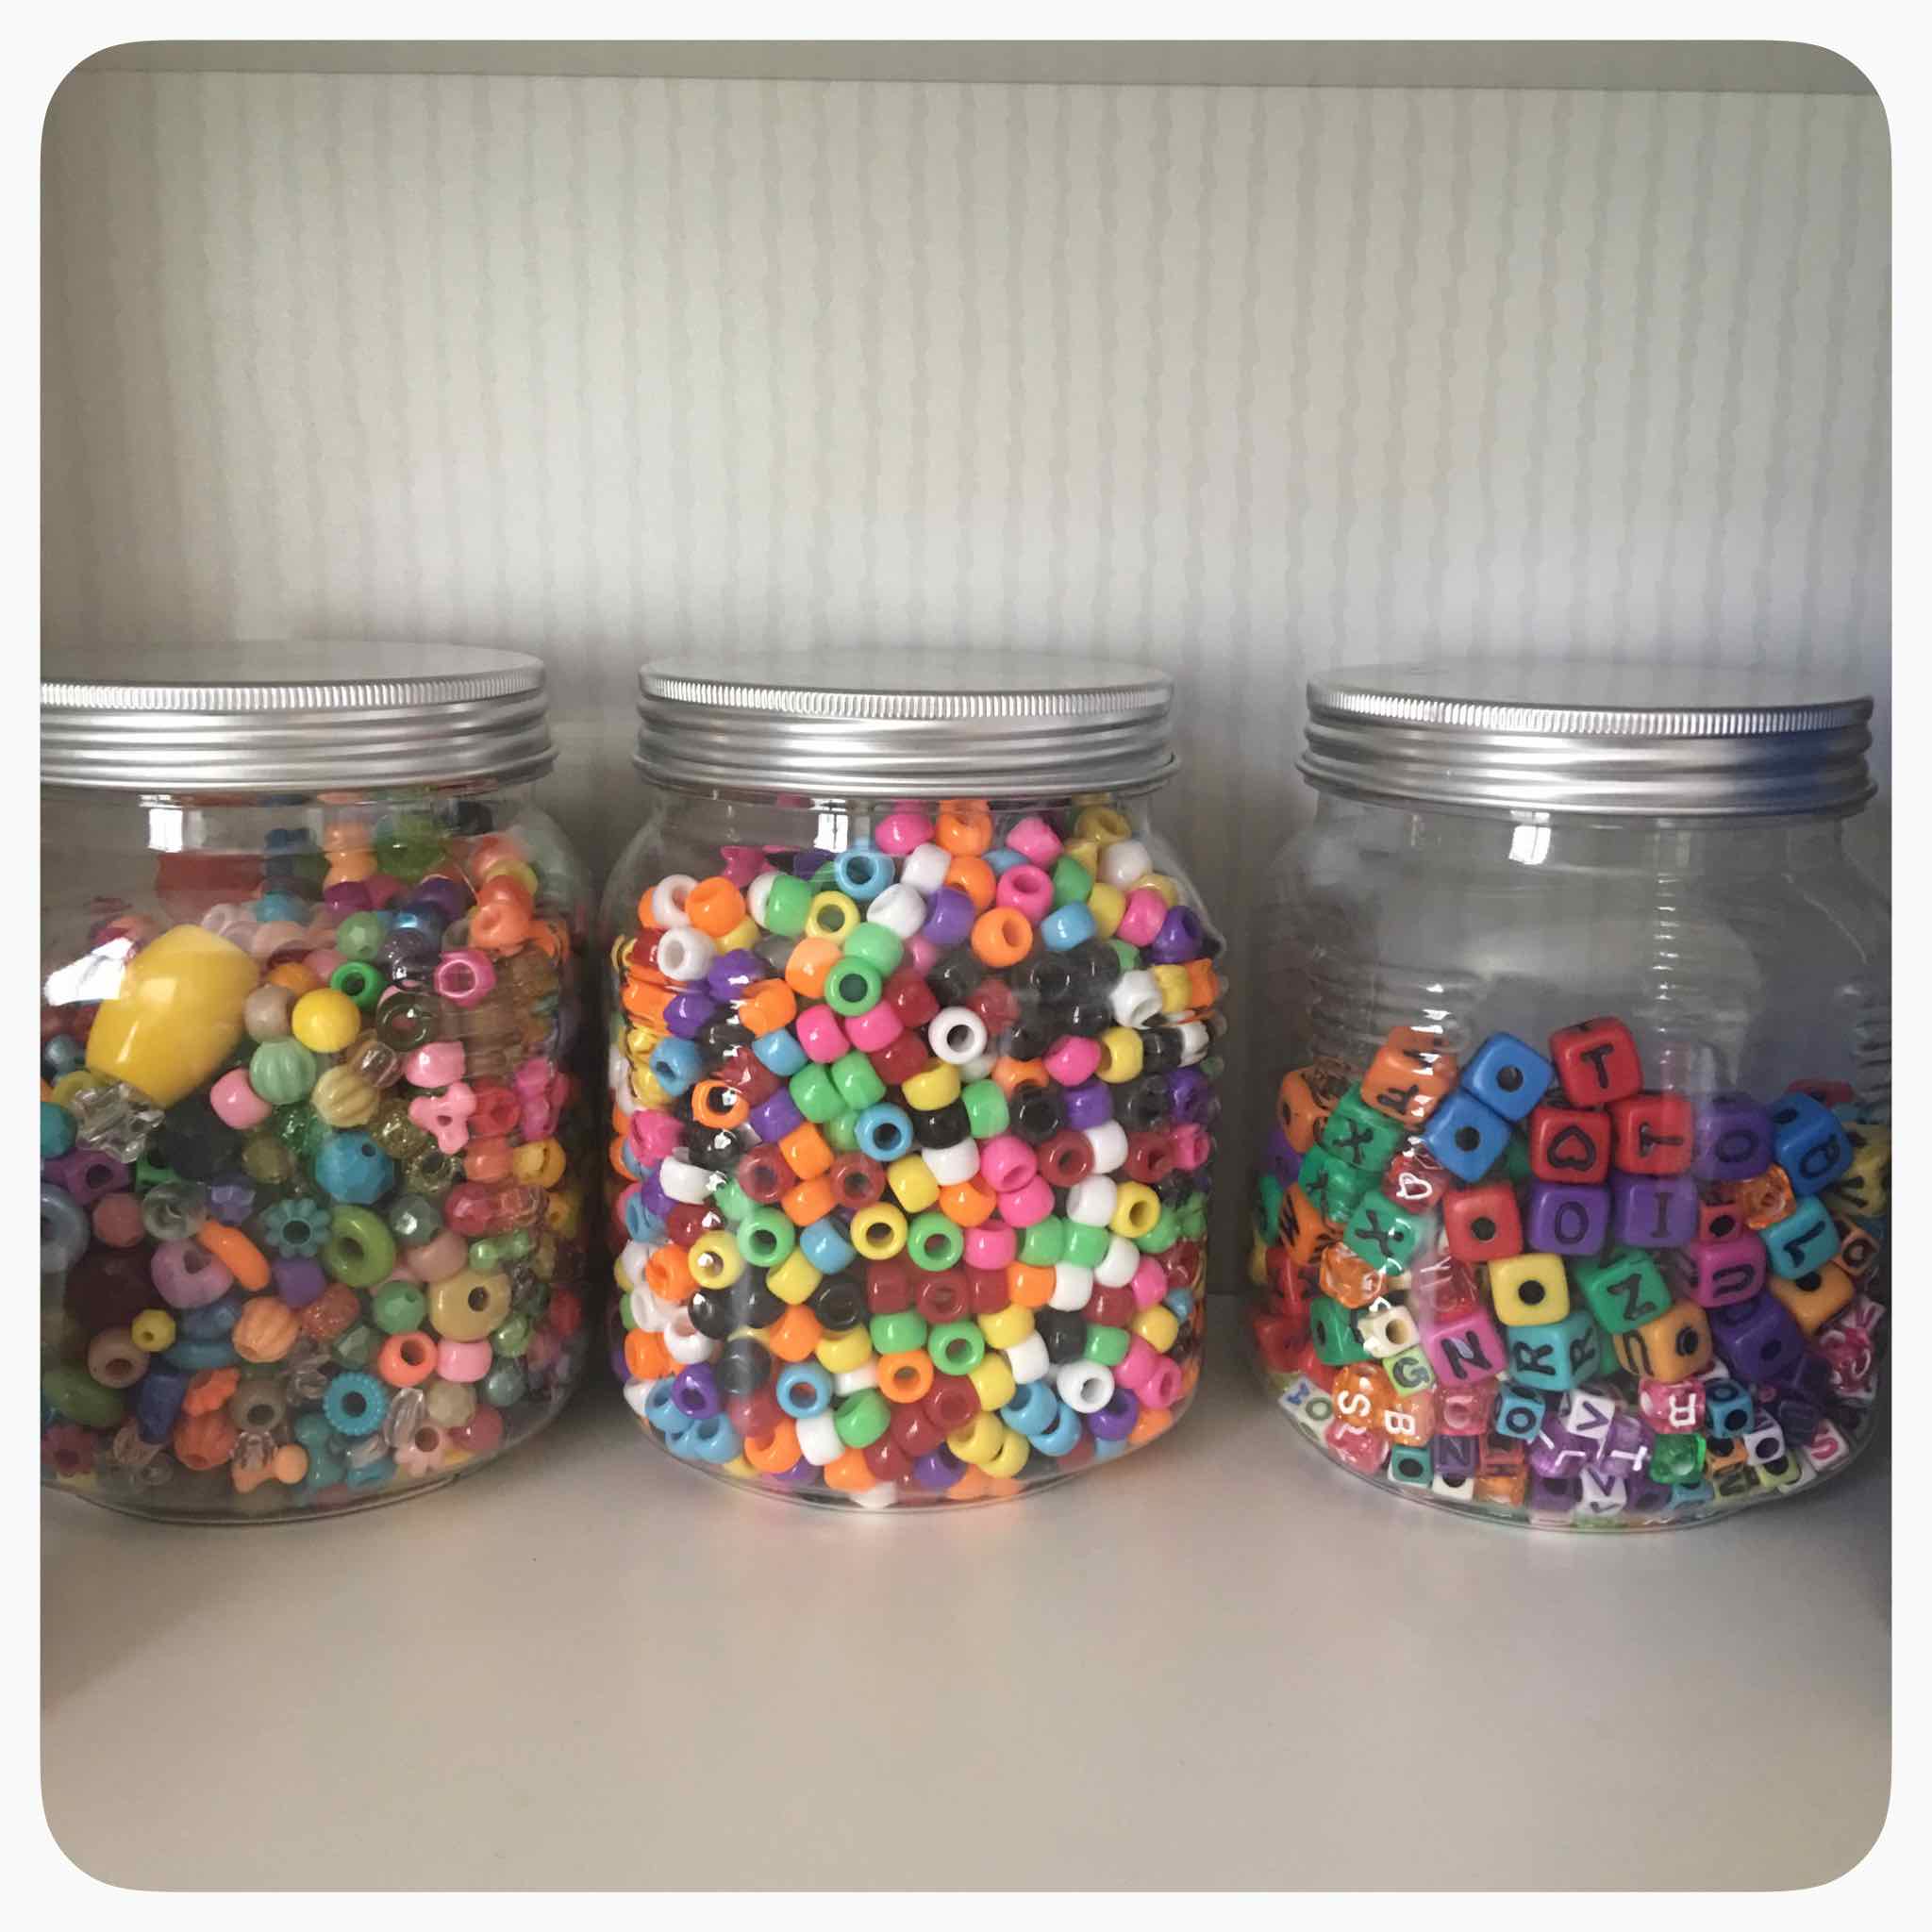 Rainbow Sensory Bottles: water, glitter, beads, hair gel. So simple and yet so much fun! Check out www.how2play.today for more ideas